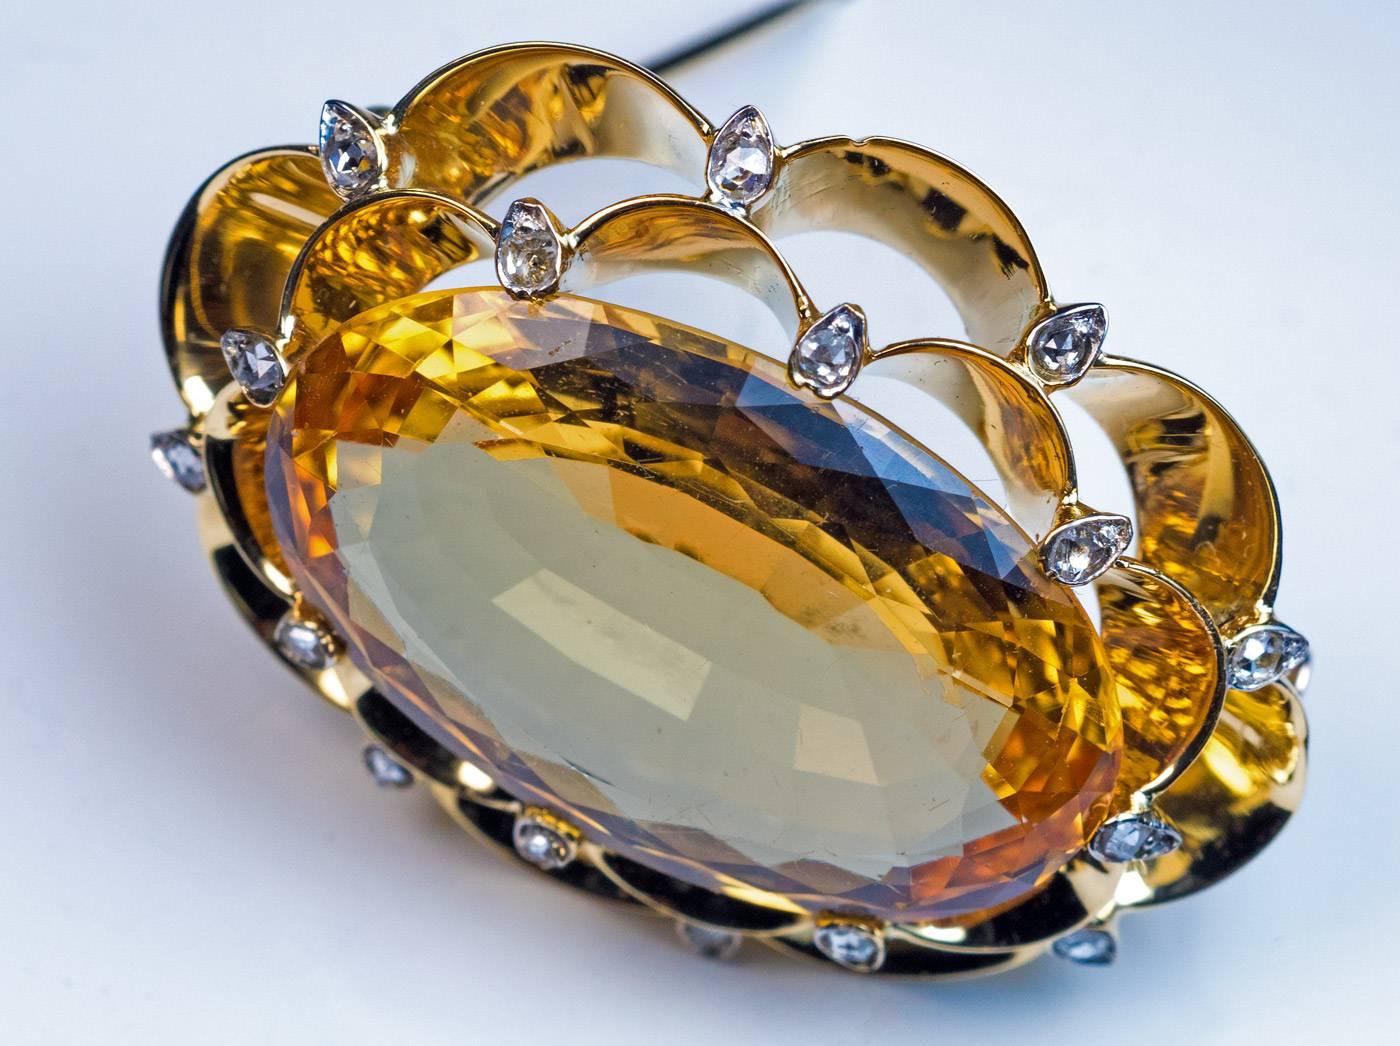 Made in Moscow in the 1930s

An Art Deco 14K gold brooch features a huge and very rare Russian precious Imperial topaz from the Ural Mountains set in a scalloped double frame embellished with old rose cut diamonds. The stone has a golden orange